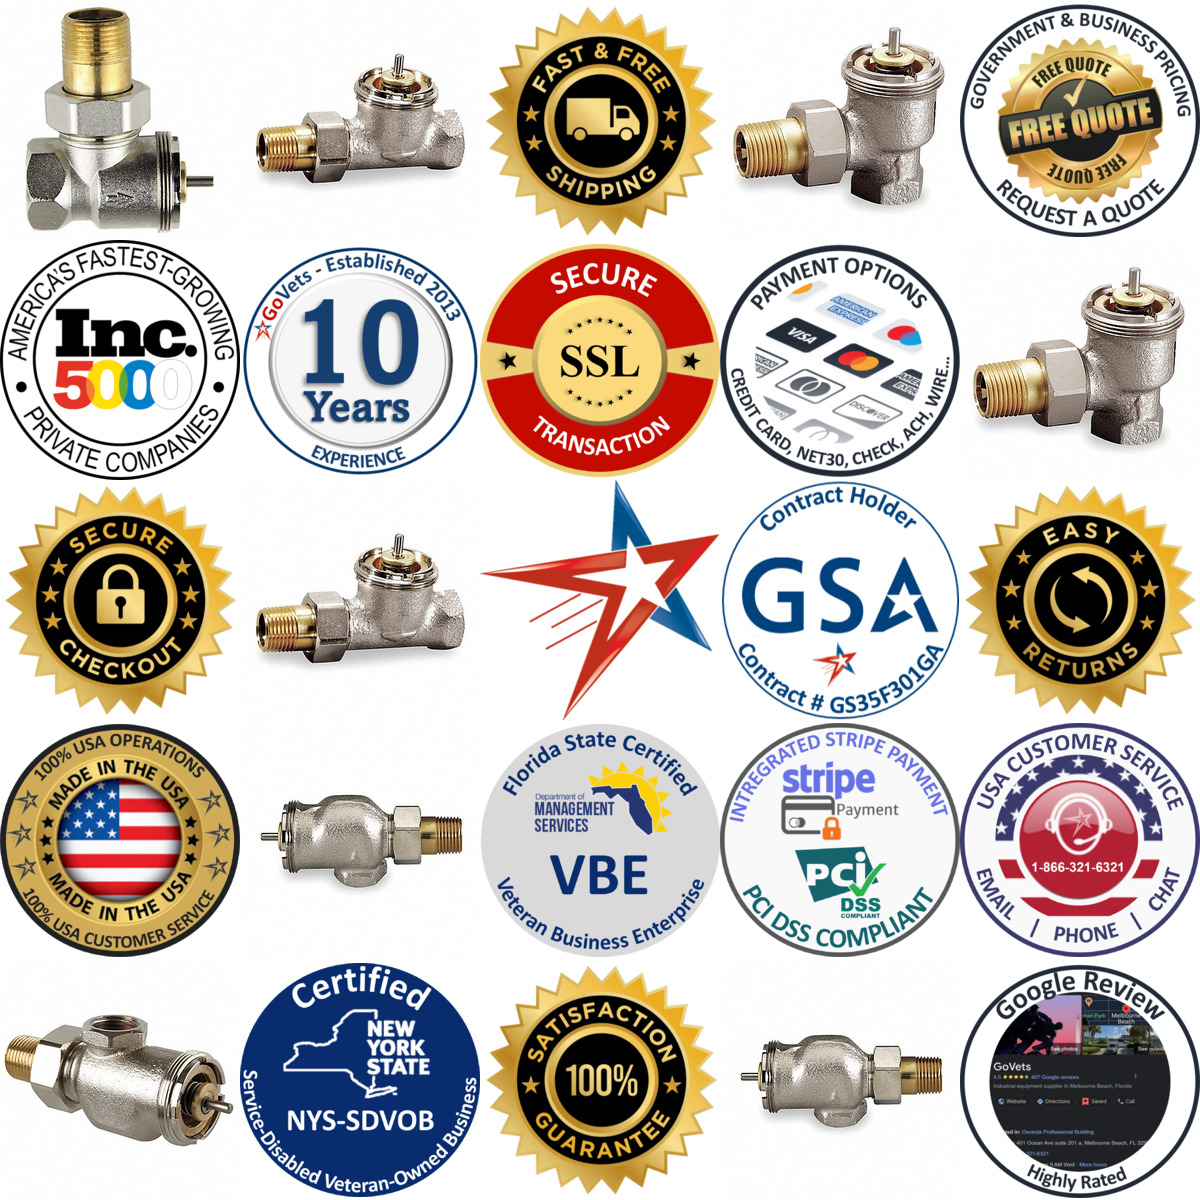 A selection of Hot Water and Steam System Radiator Valve Bodies products on GoVets